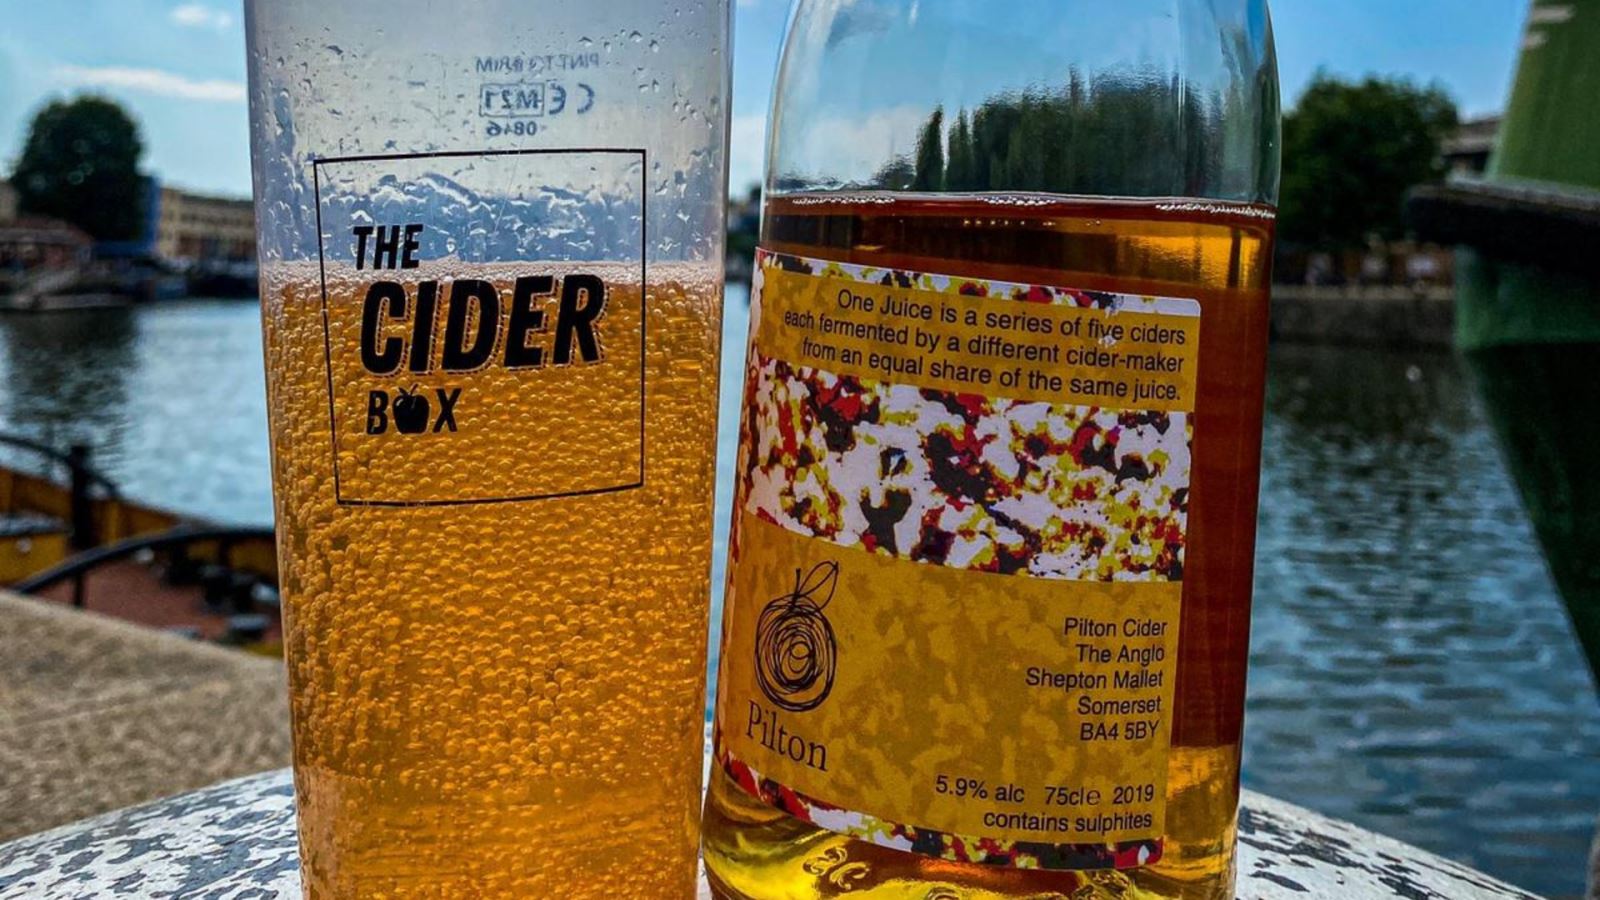 The Cider's Box's modern craft cider pictured at CARGO, Wapping Wharf - credit Thom Foodery